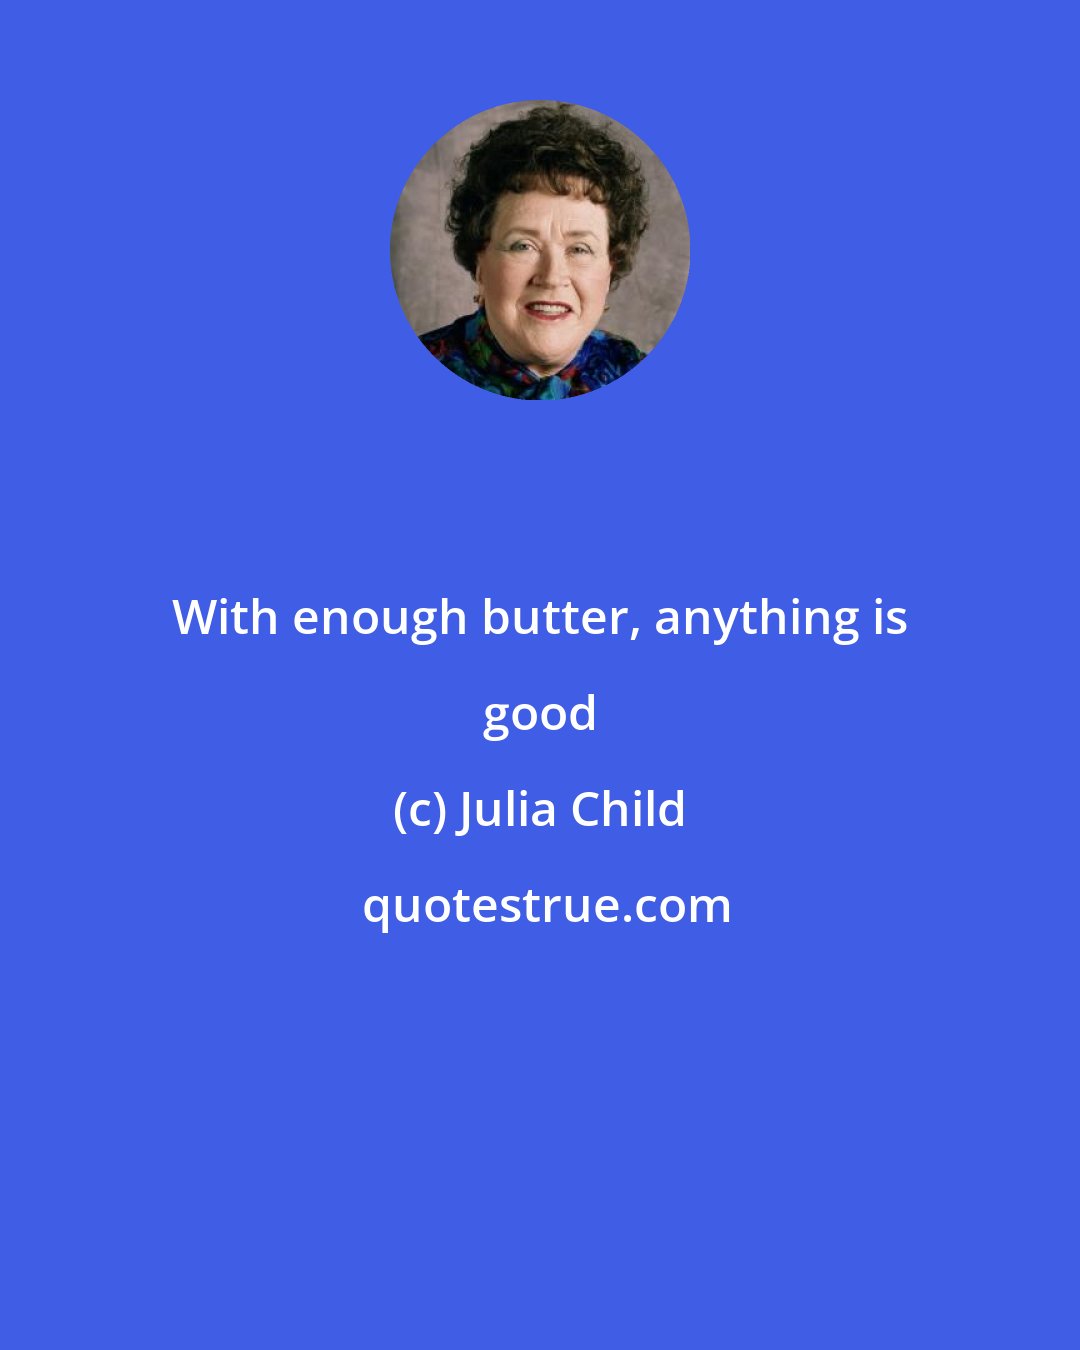 Julia Child: With enough butter, anything is good